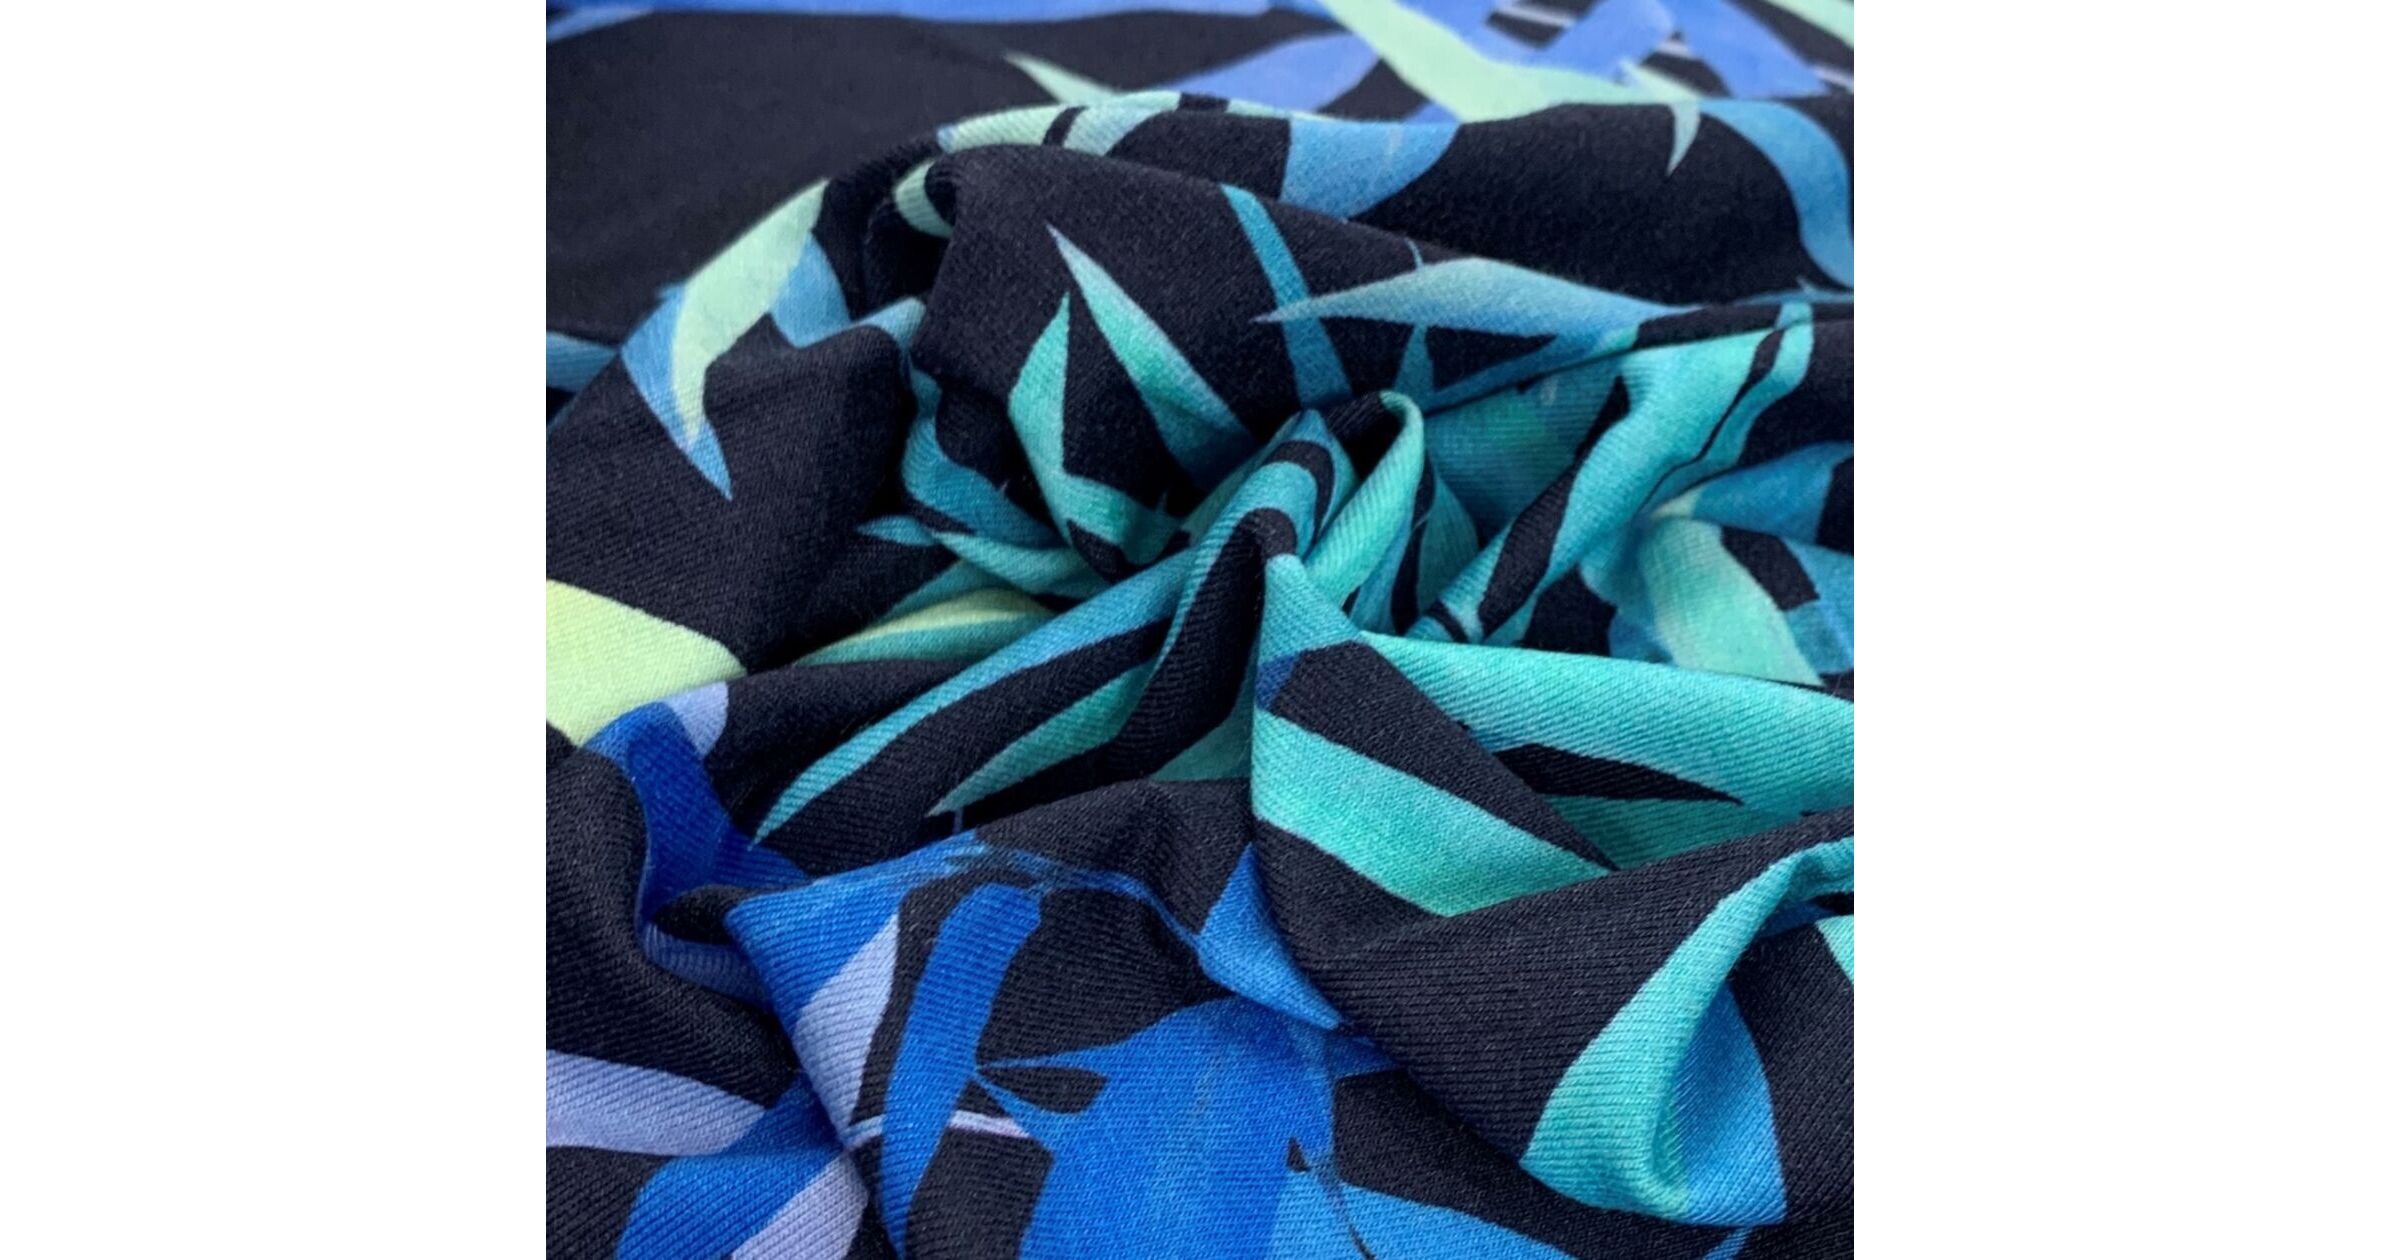 Discover Vibrant Colored Viscose Jersey Fabric at Affordable Prices